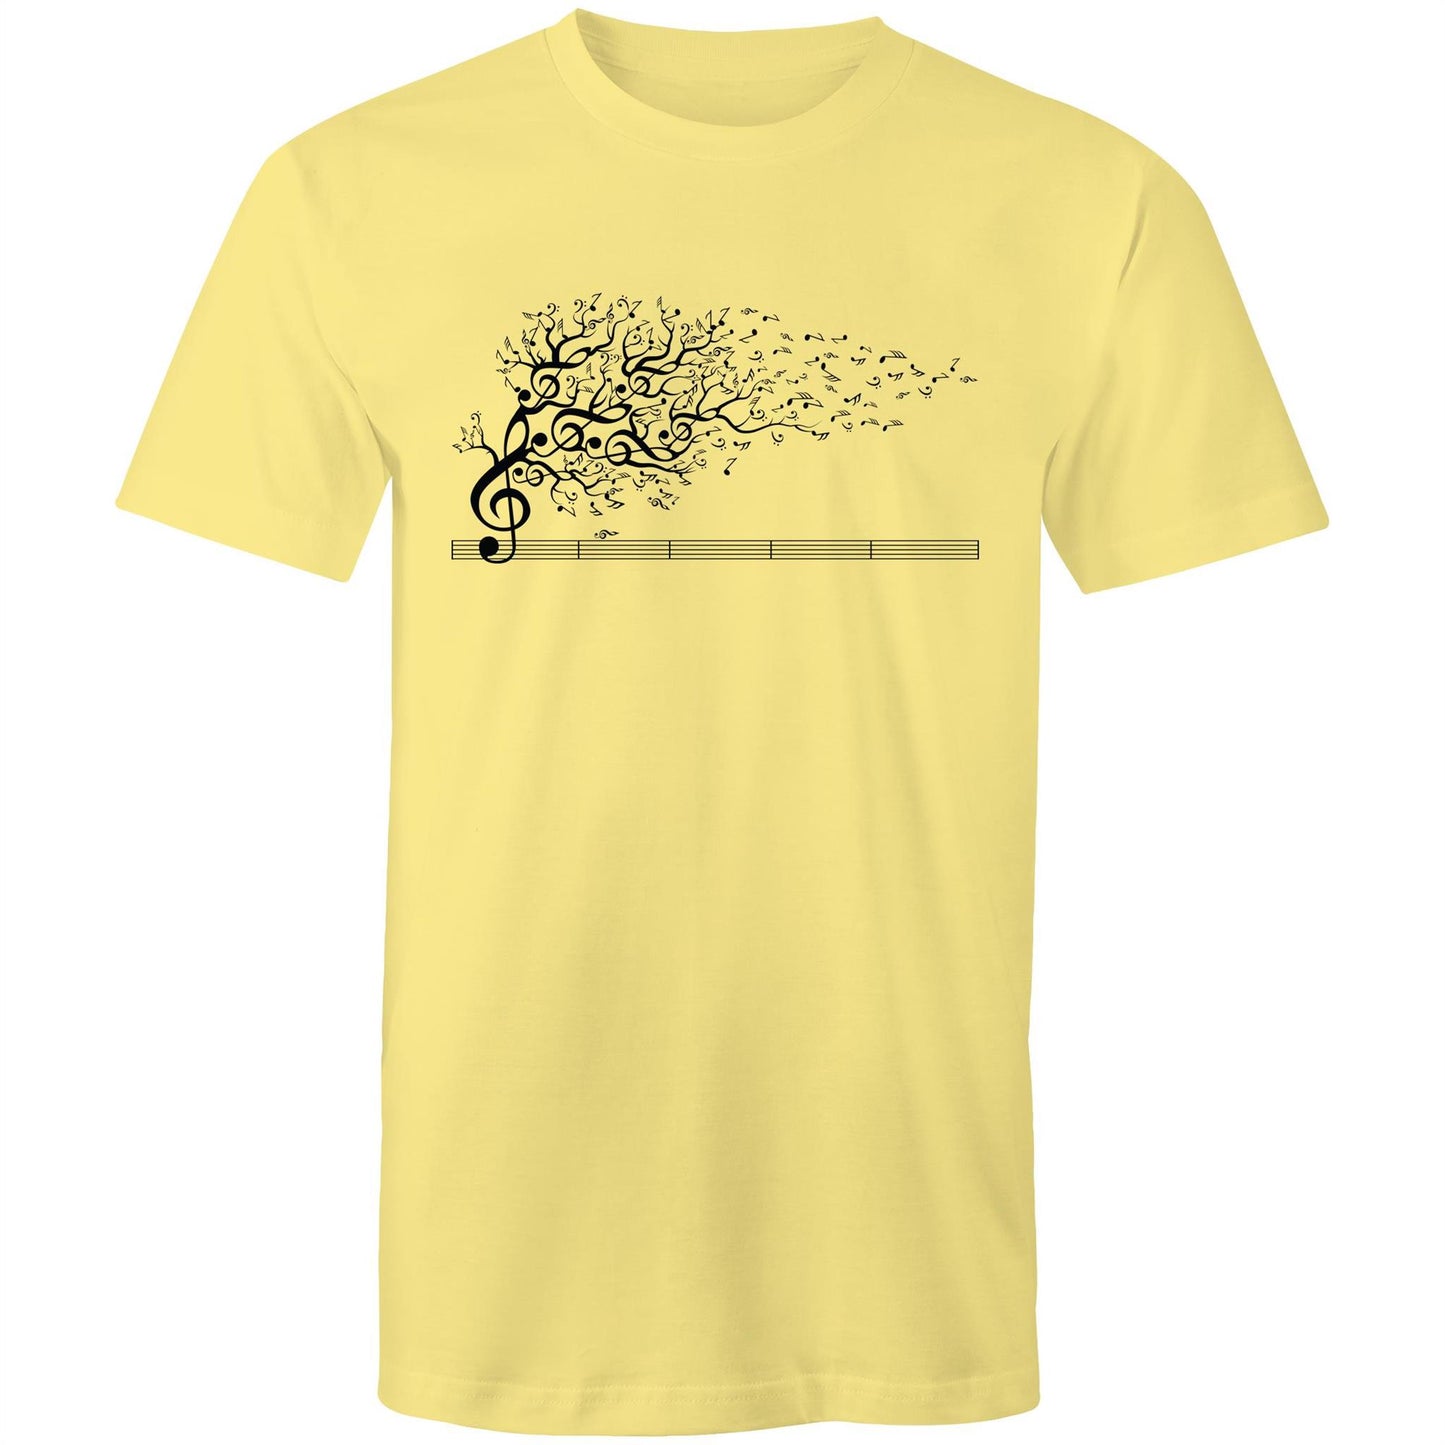 The Sound of Nature - Men's T-Shirt